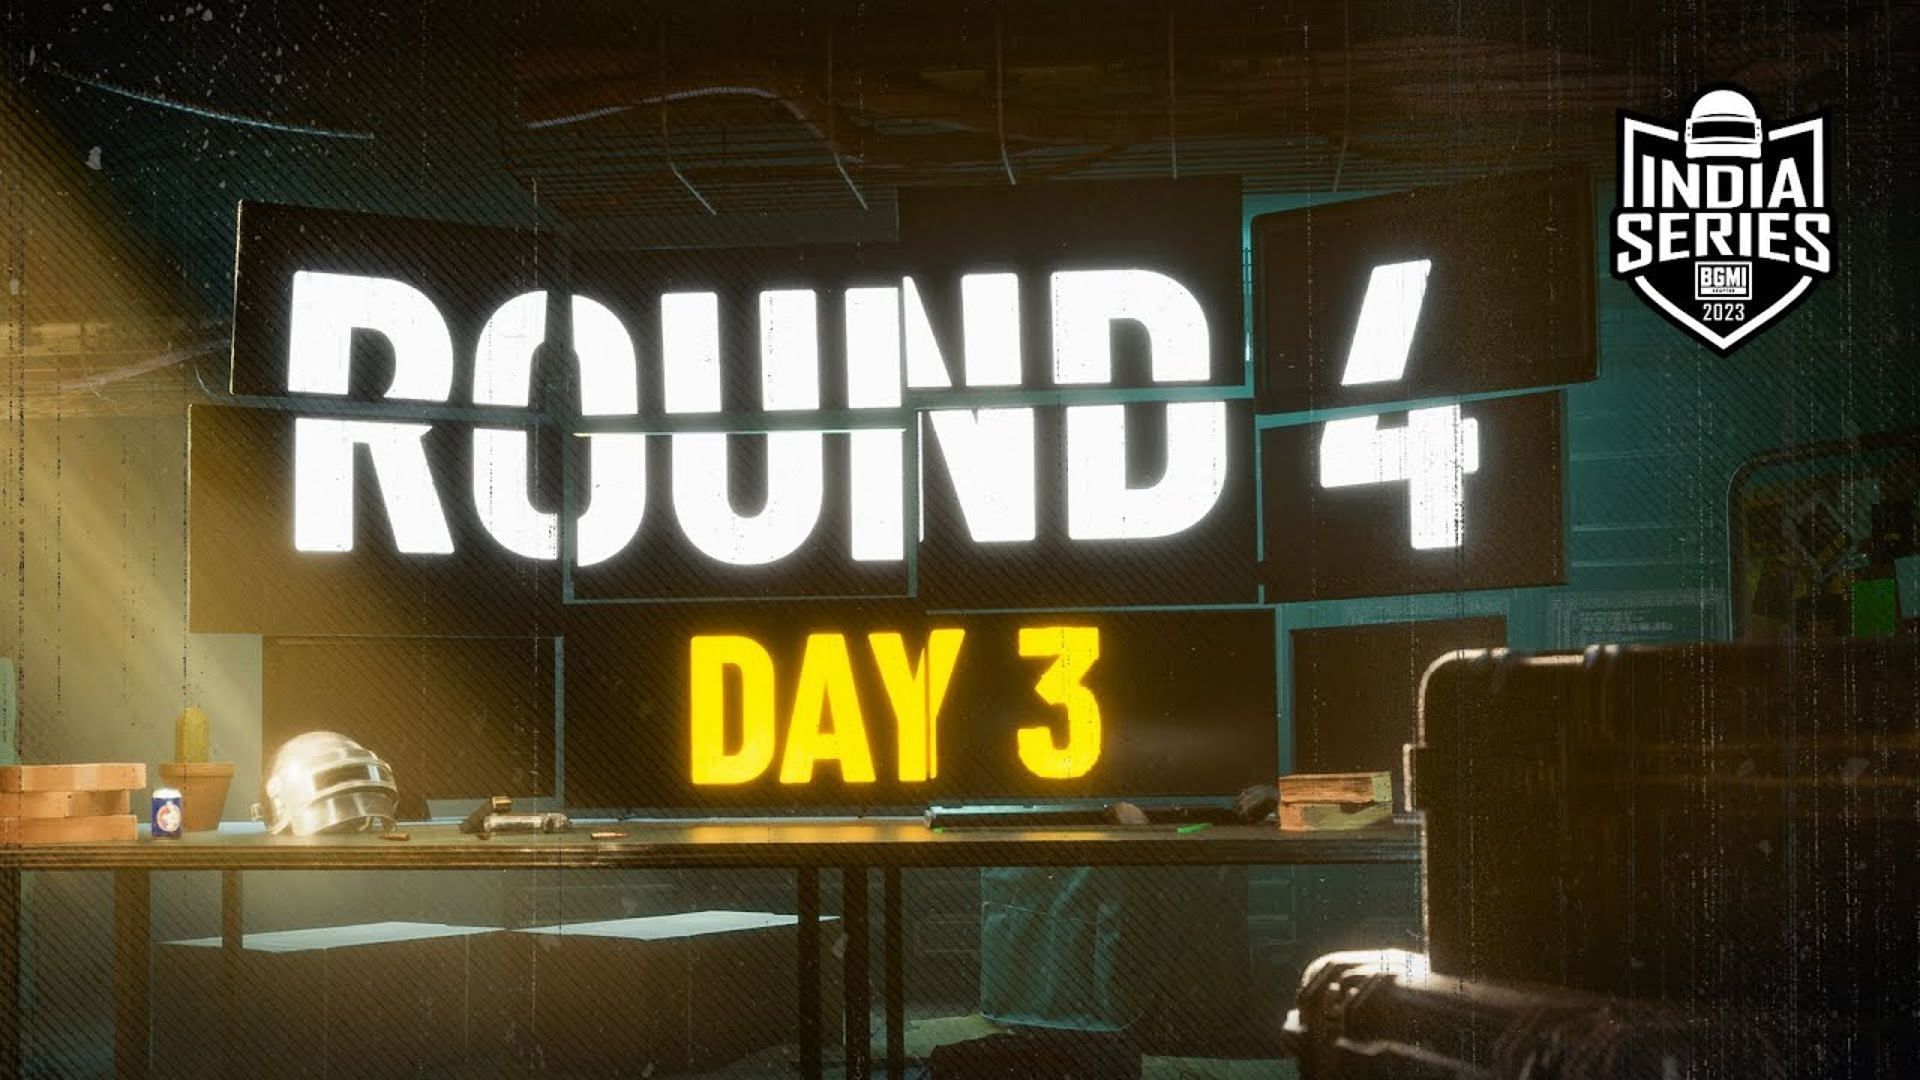 Day 3 of BGIS Round 4 will be played on September 23 (Image via BGMI)